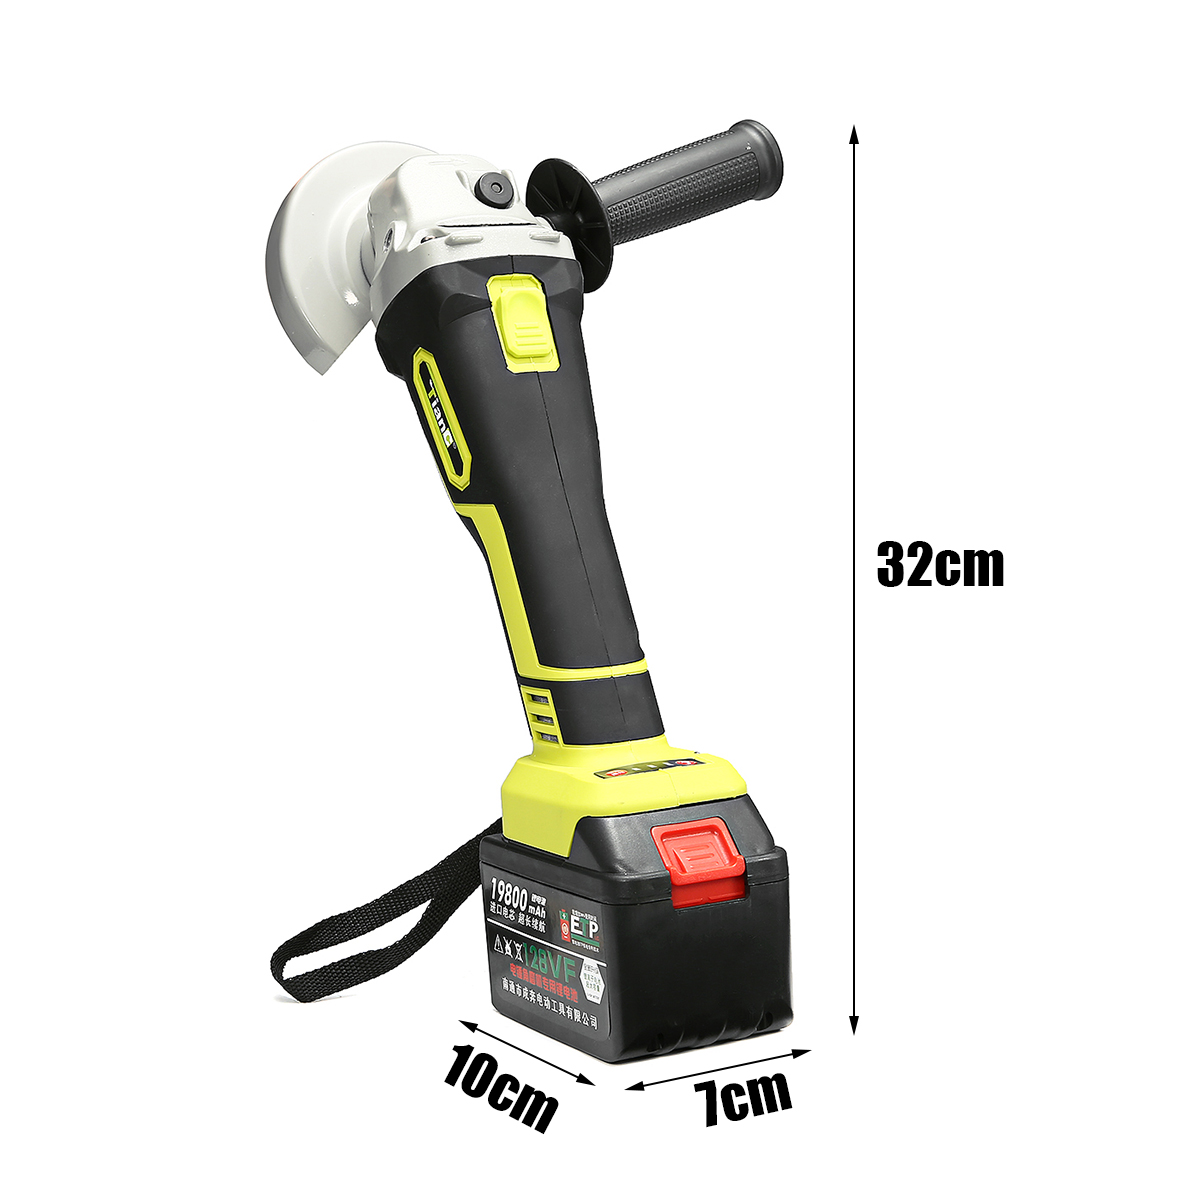 128VF-19800mAh-Lithium-Ion-Brushless-Cut-Off-Angle-Grinder-Cordless-Electric-Angle-Grinder-Power-Cut-1397283-5